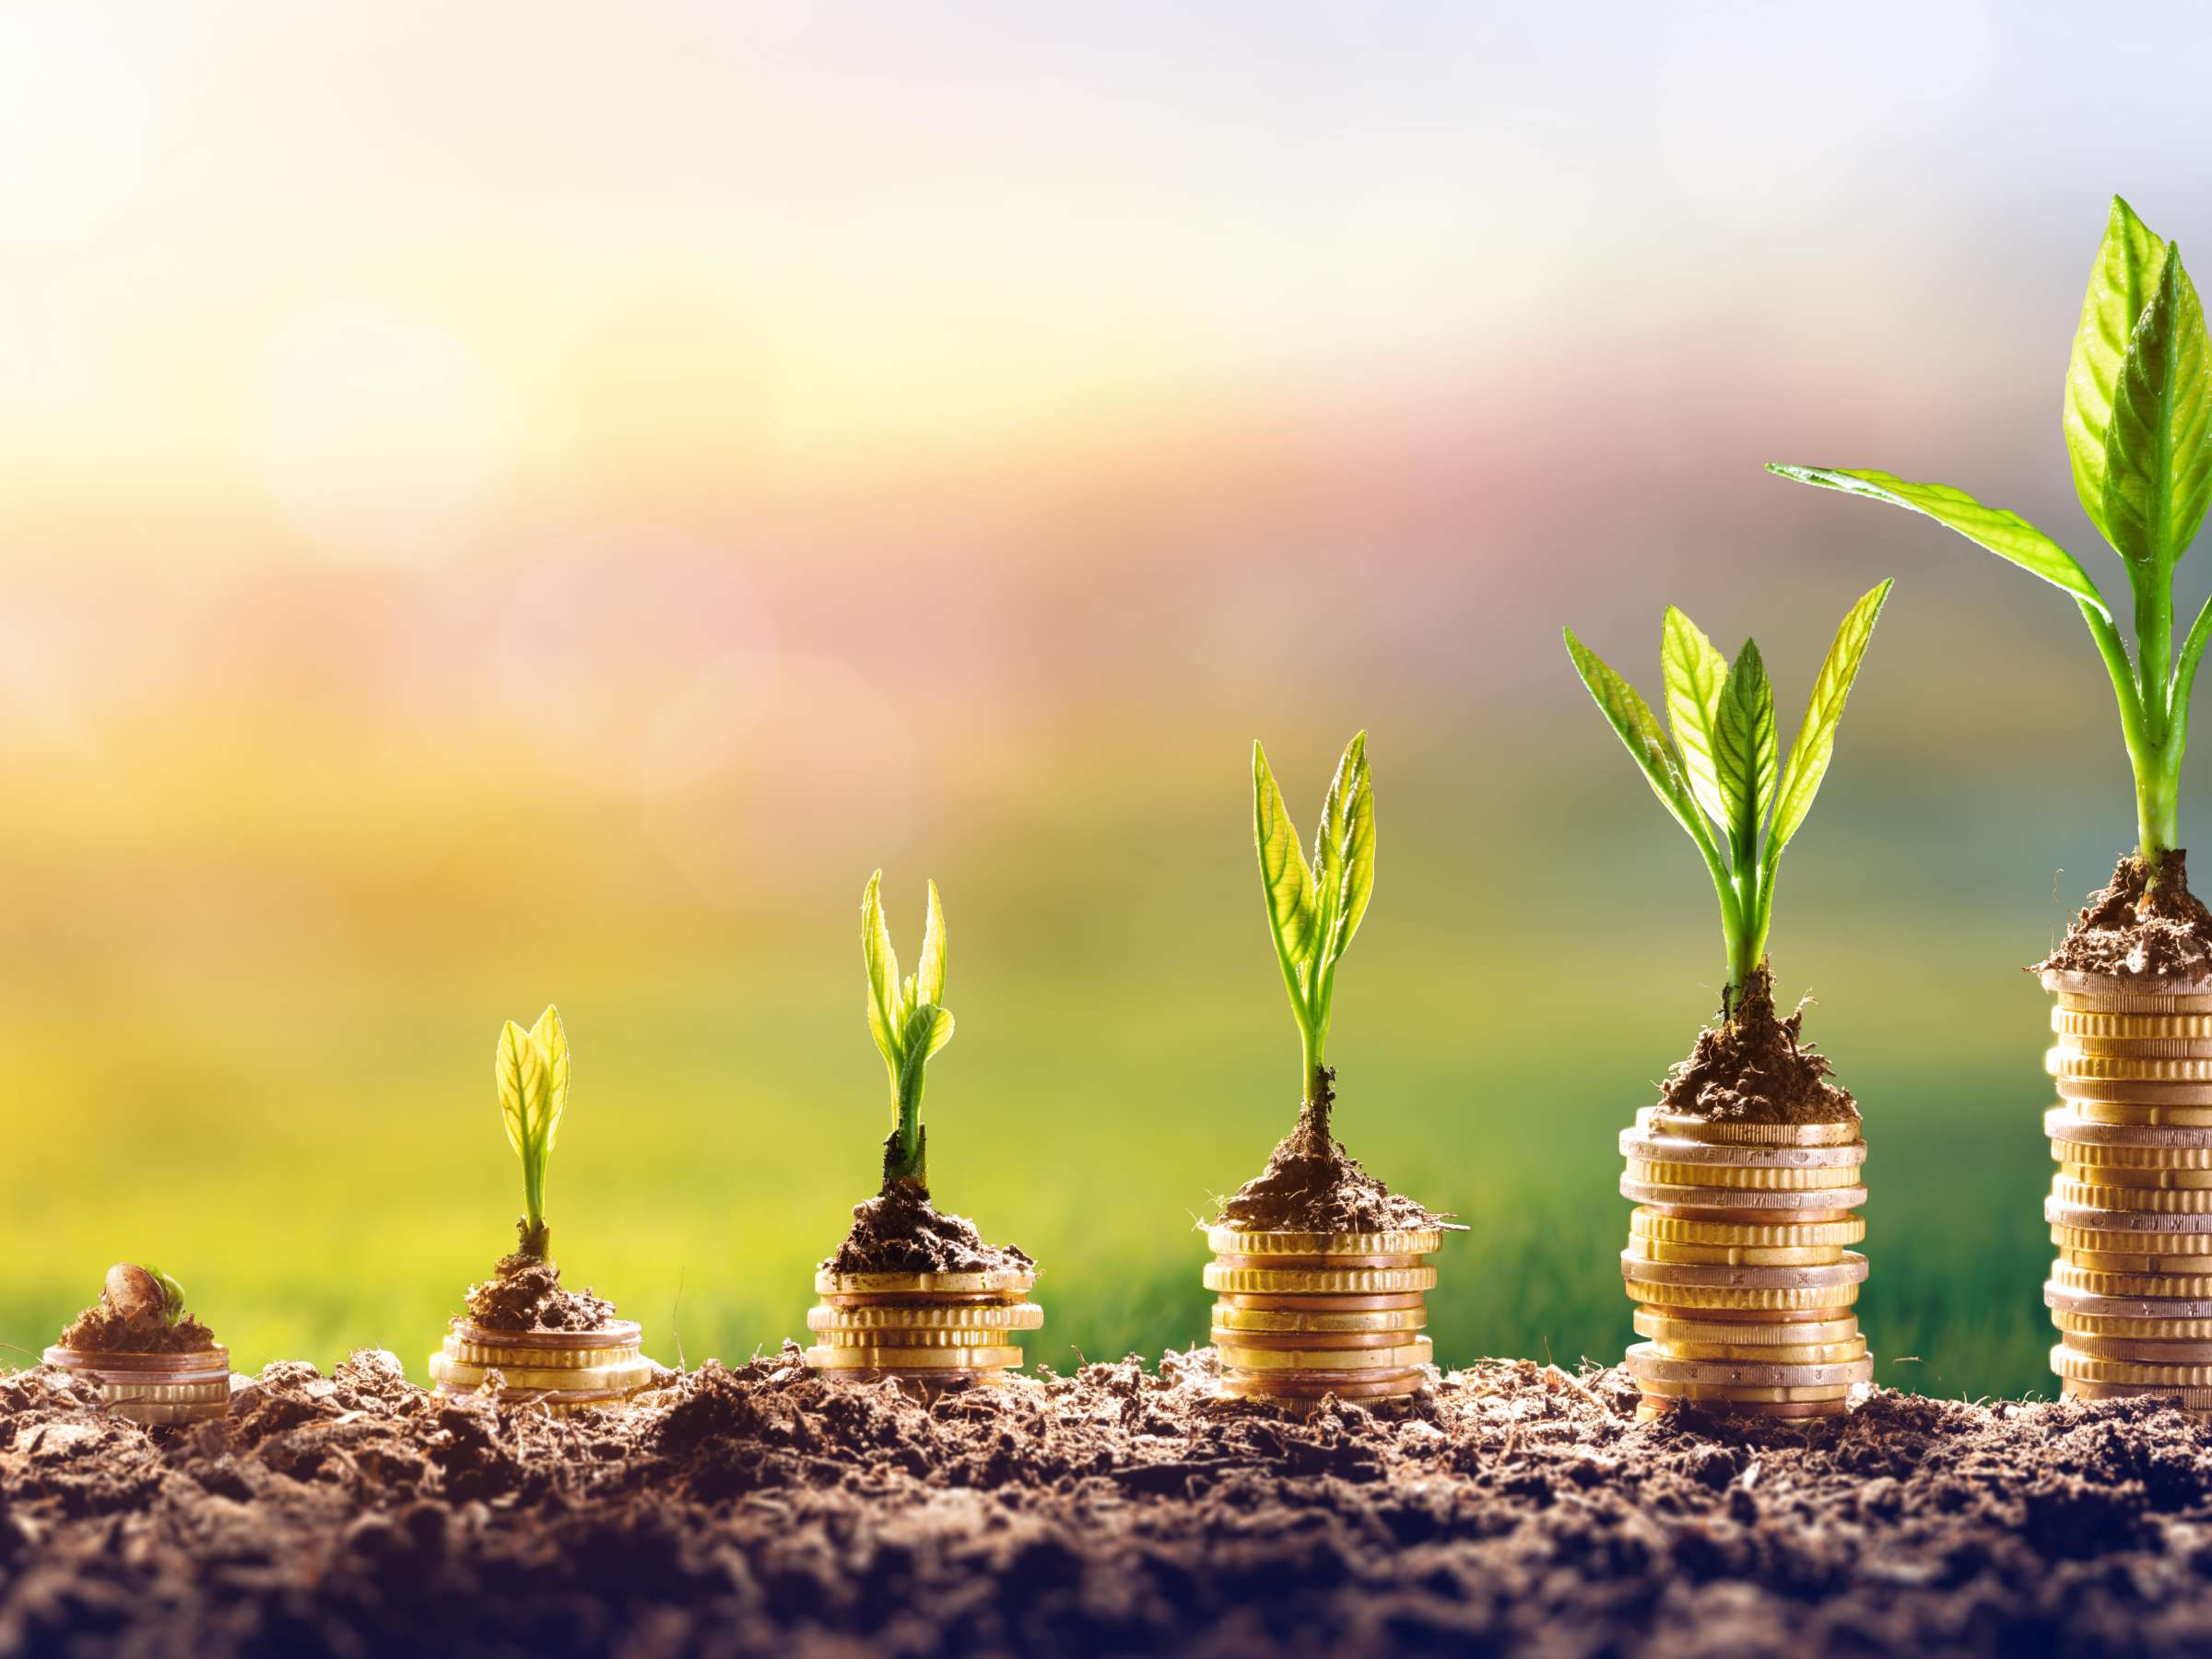 Growing Money - Planting in Coins - Financial and Investment Concept